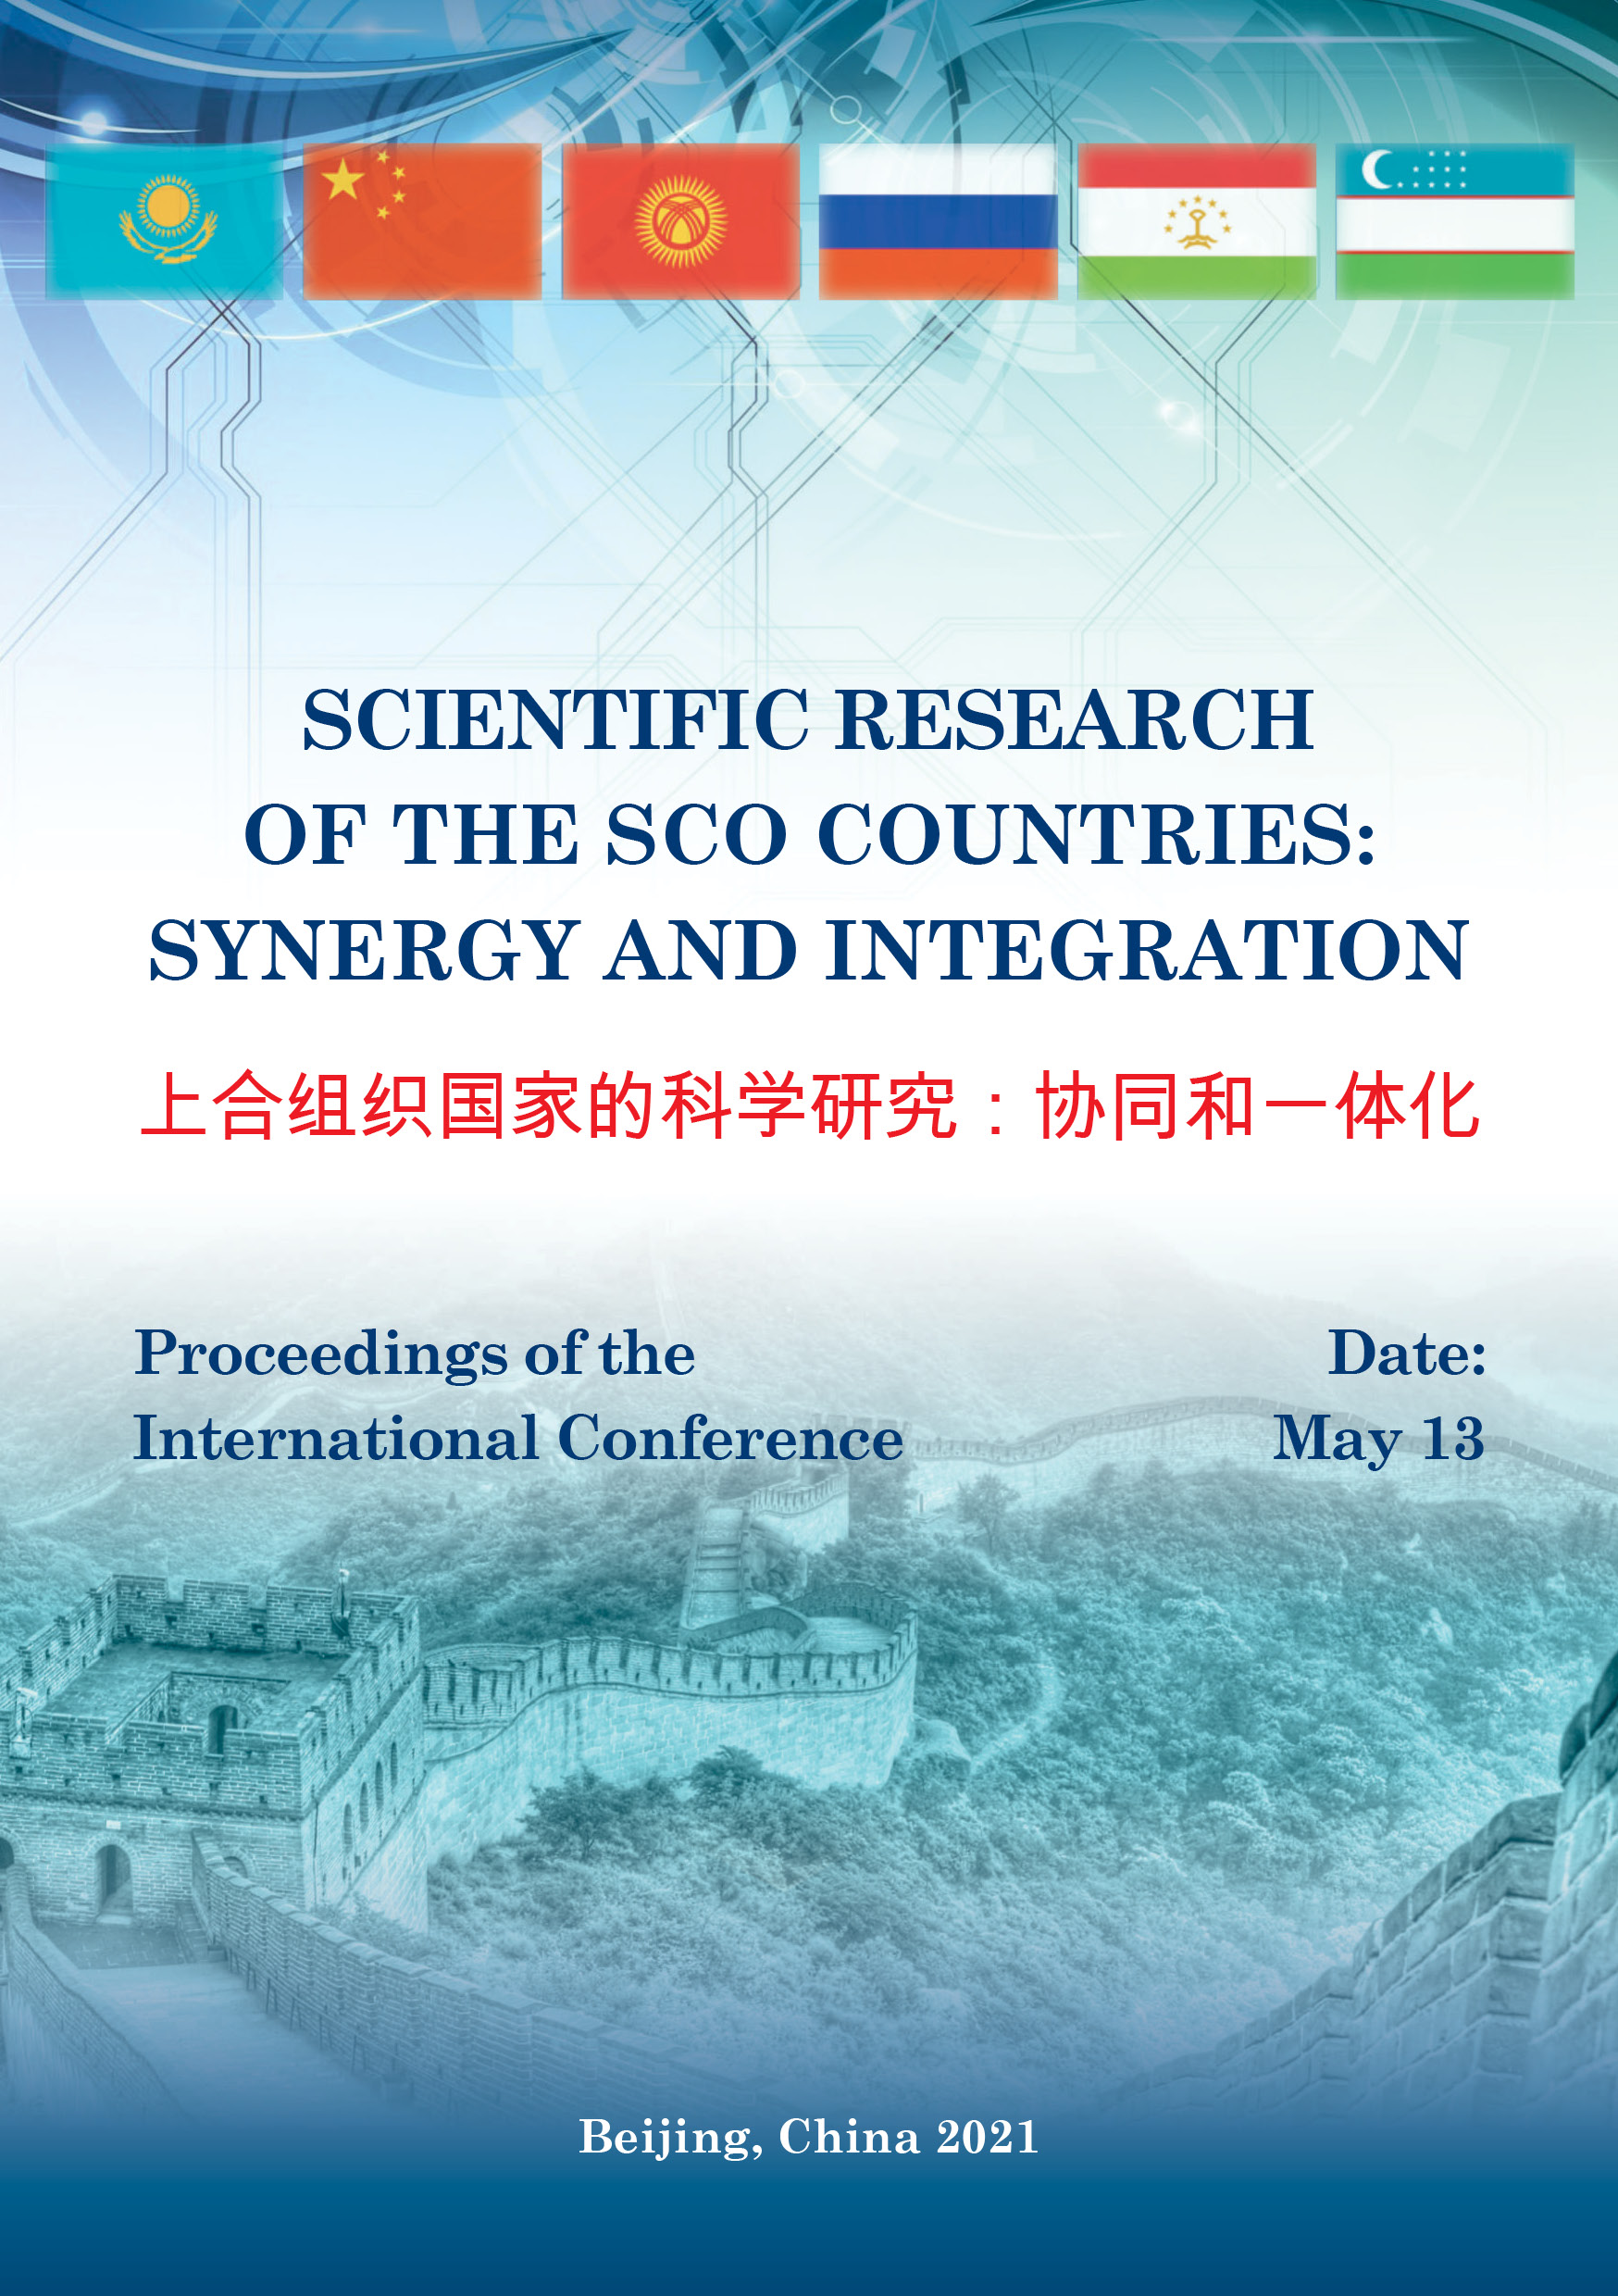                         SCIENTIFIC RESEARCH OF THE SCO COUNTRIES: SYNERGY AND INTEGRATION. PART 1
            